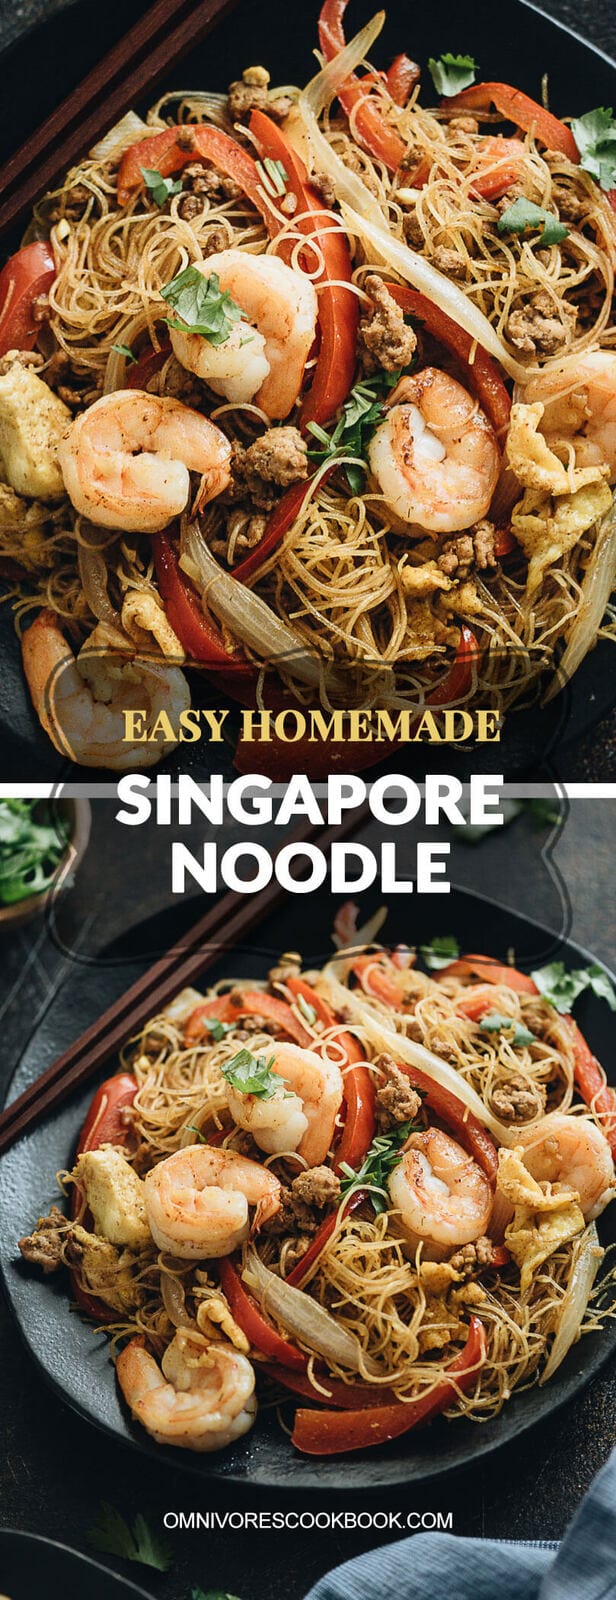 Easy Singapore Noodles (Singapore Mei Fun) - An Authentic recipe that teaches you how to create the best Singapore noodles loaded with shrimp, pork, and eggs, with a flavorful curry sauce. The dish is gluten-free and vegetarian adaptable. #asian #veggie #healthy #stirfry #chinese